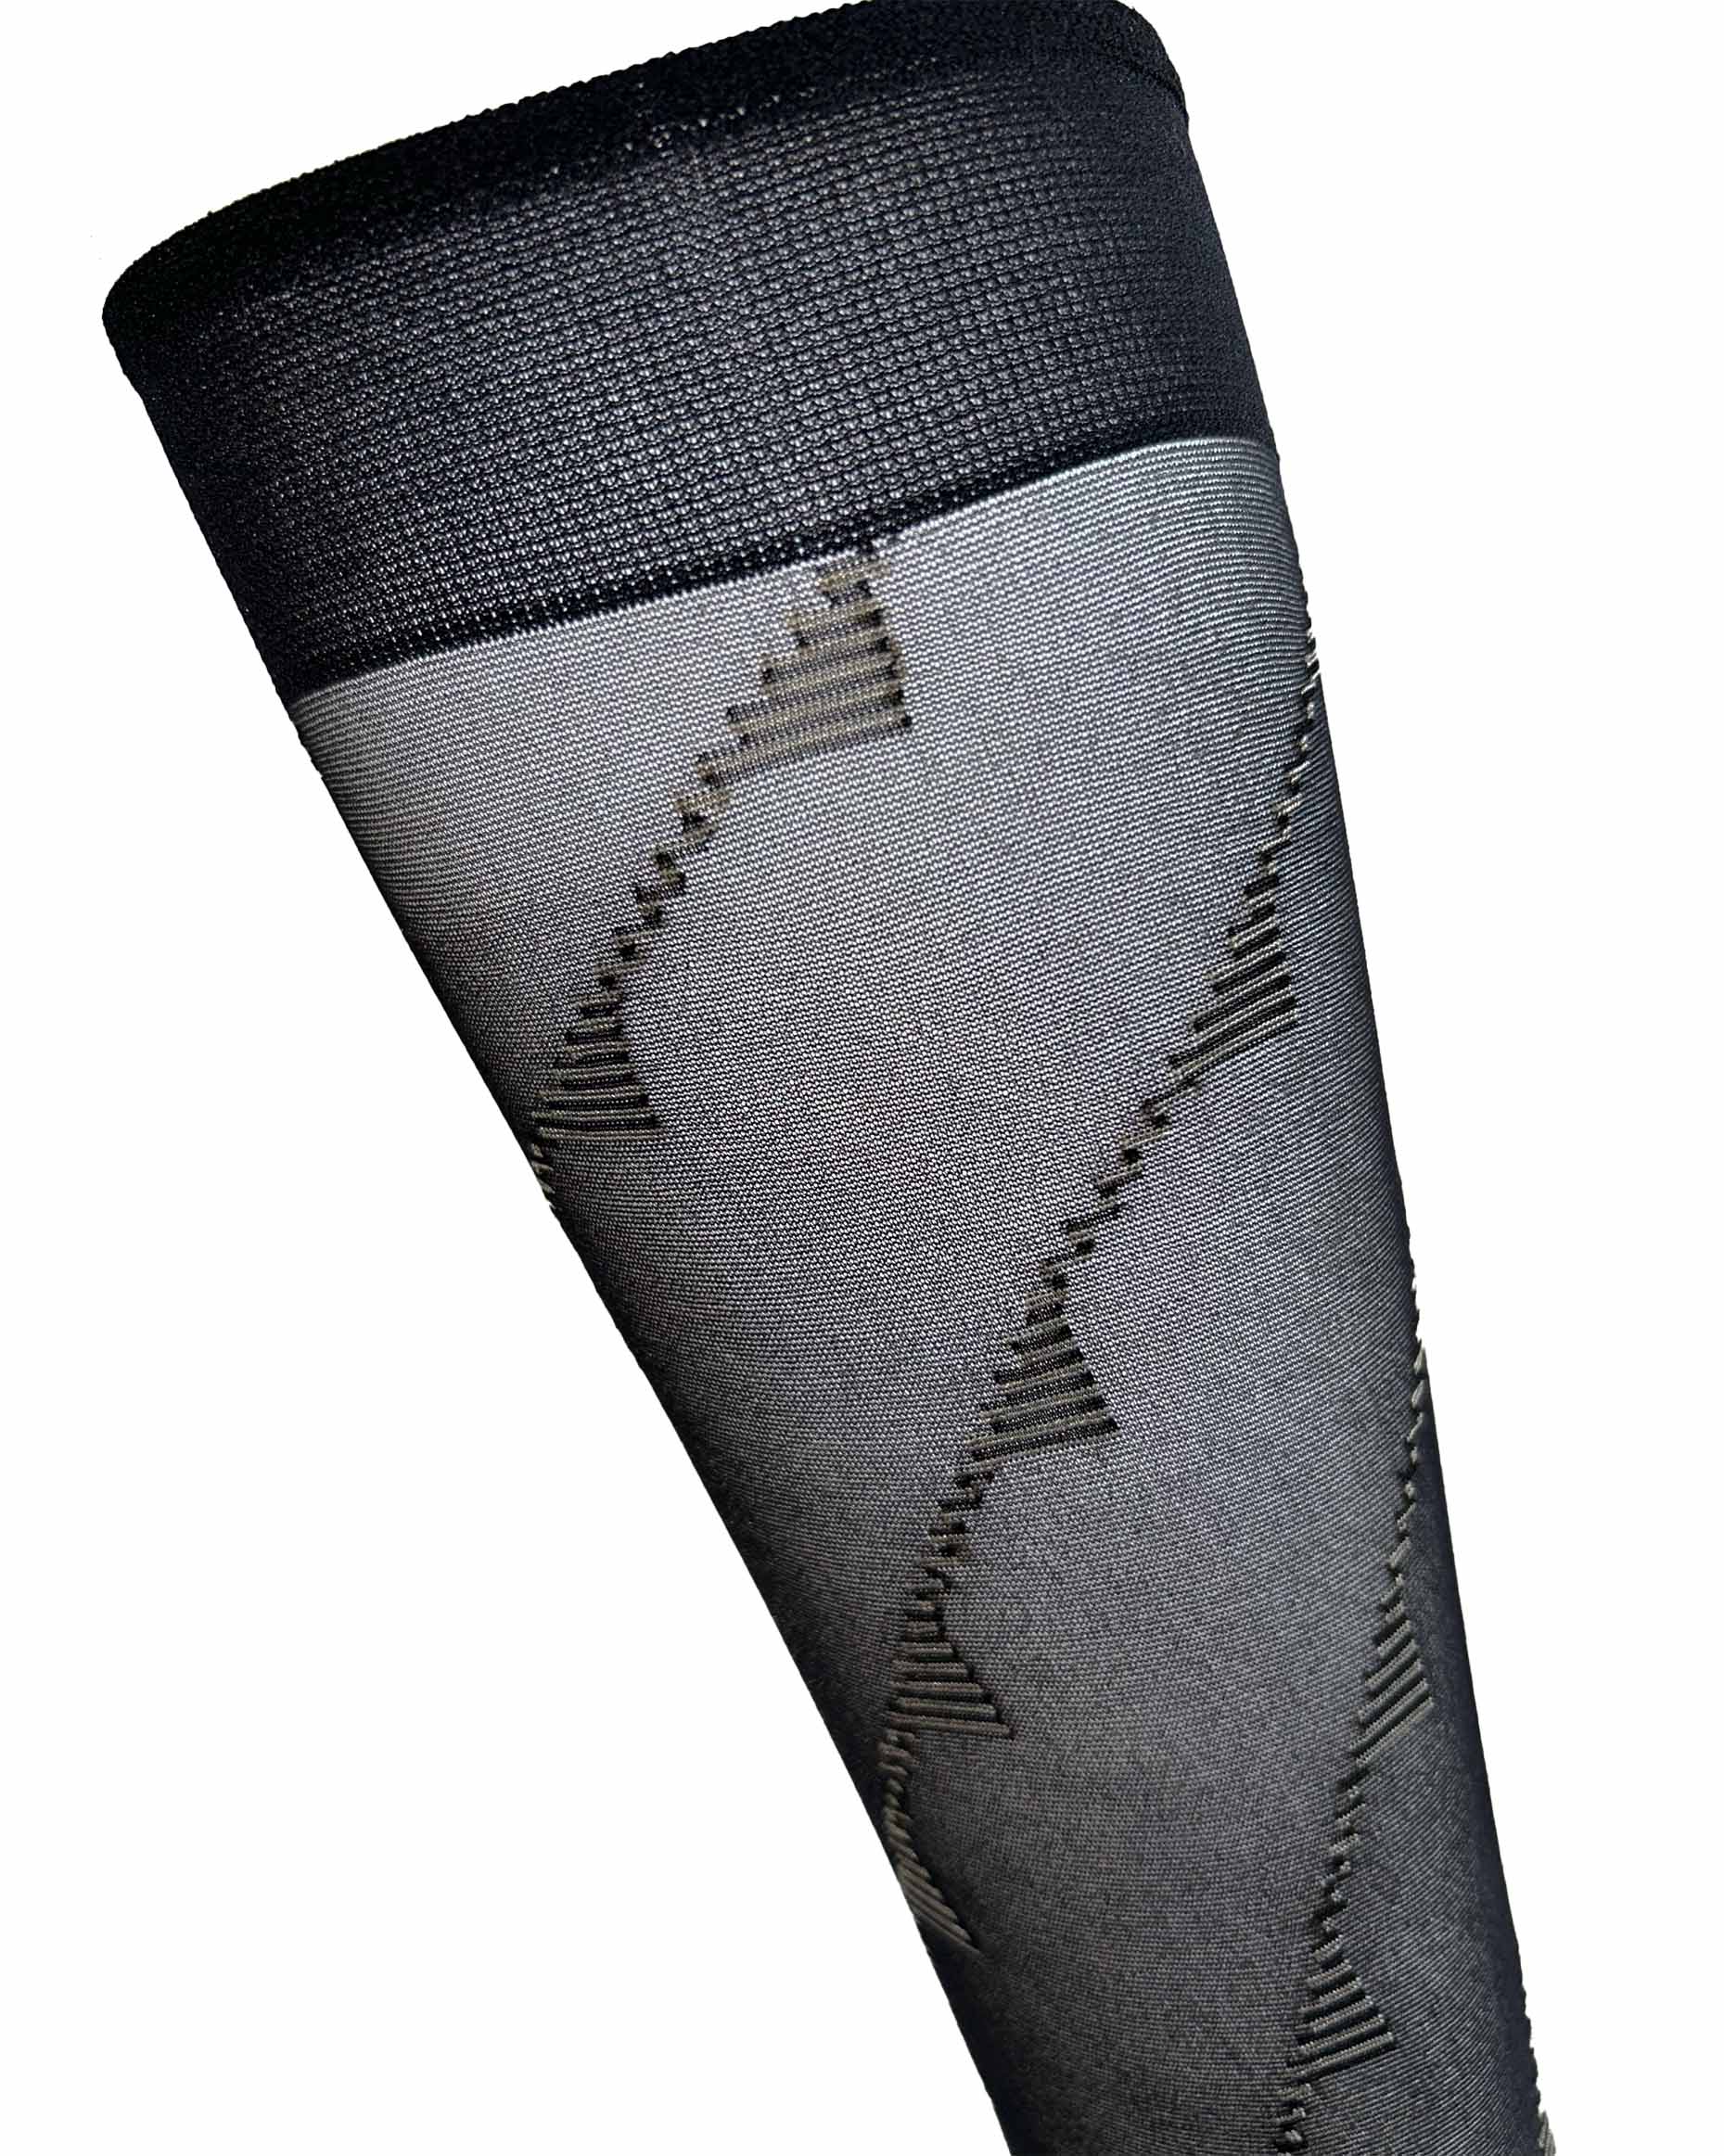 Omsa 3316 Frame Gambaletto - Sheer black fashion knee-high socks with a nude diagonal linear pattern swirling around the leg.